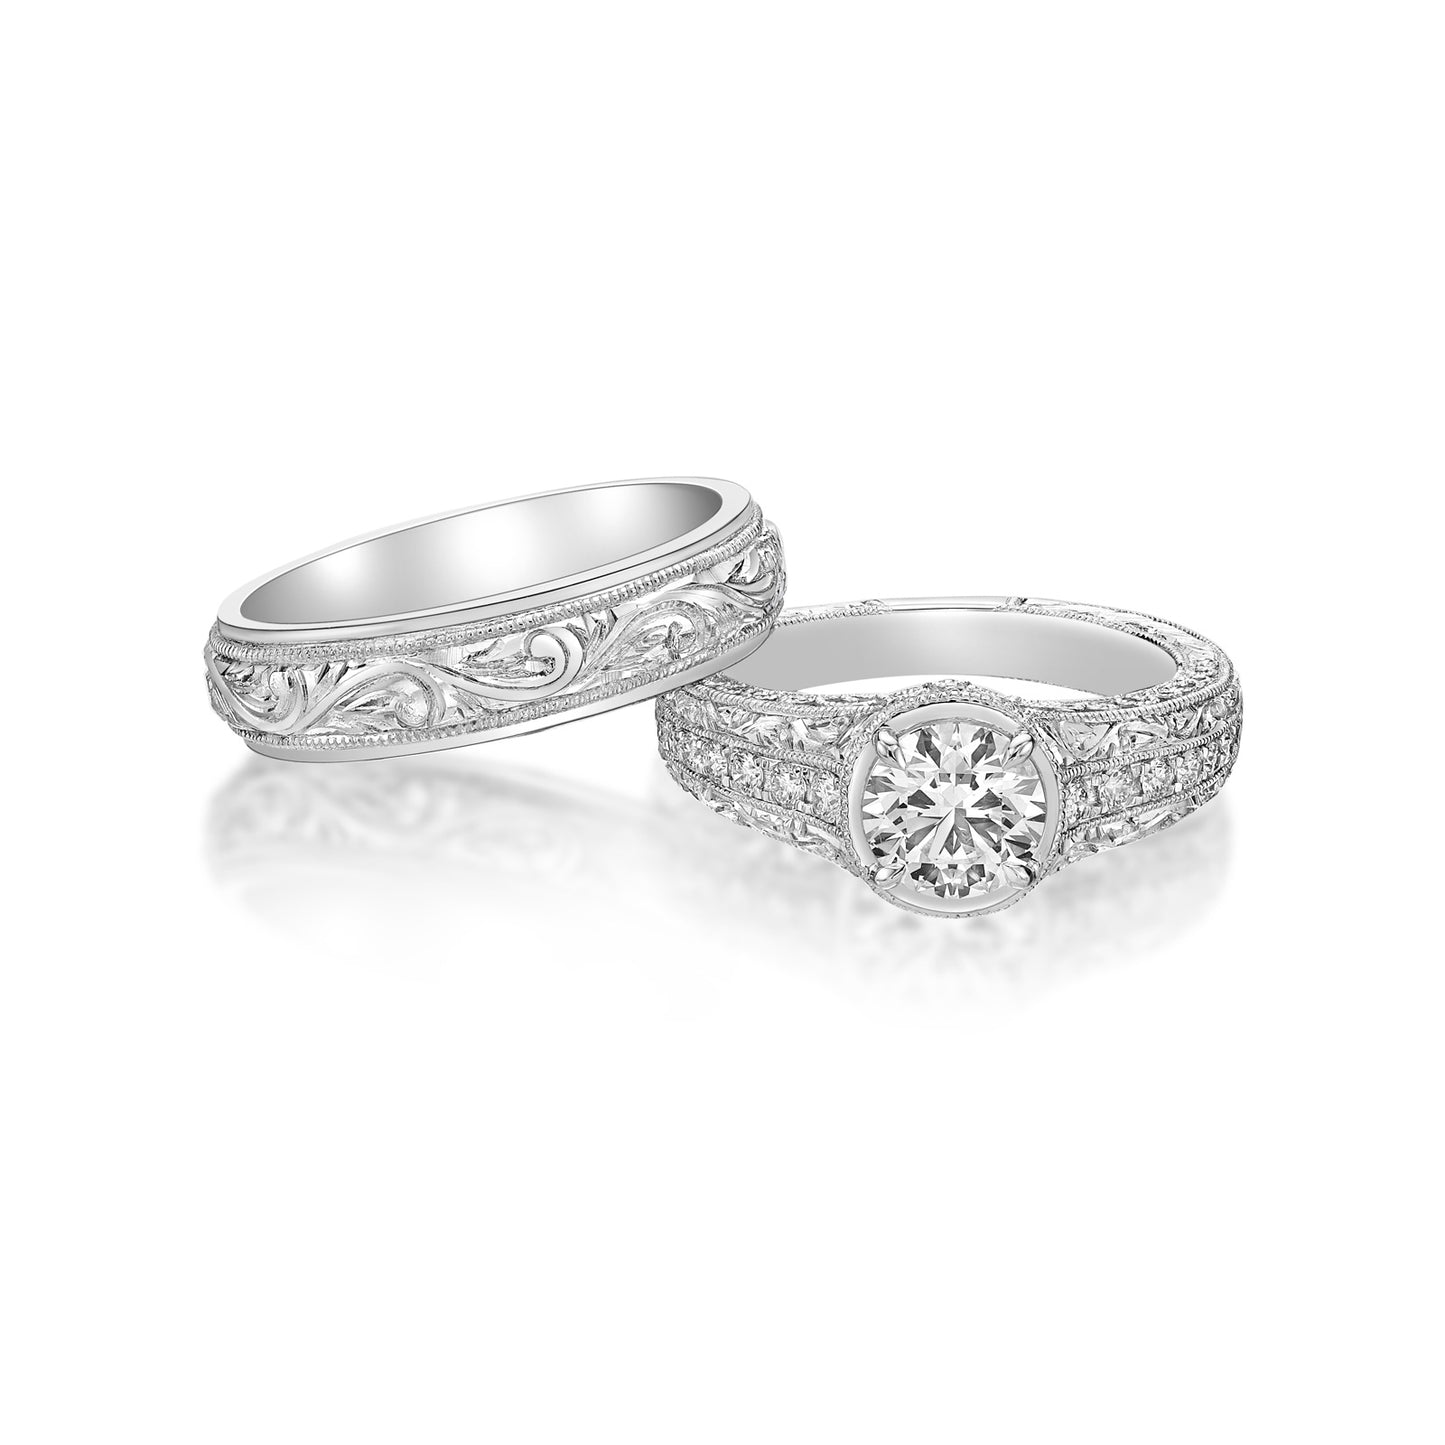 1.20ct Round Brilliant diamond set with four claws in a handmade 18K White Gold Vintage-style setting, custom milgrain band with micropave set diamonds and filigree detailing on side profile